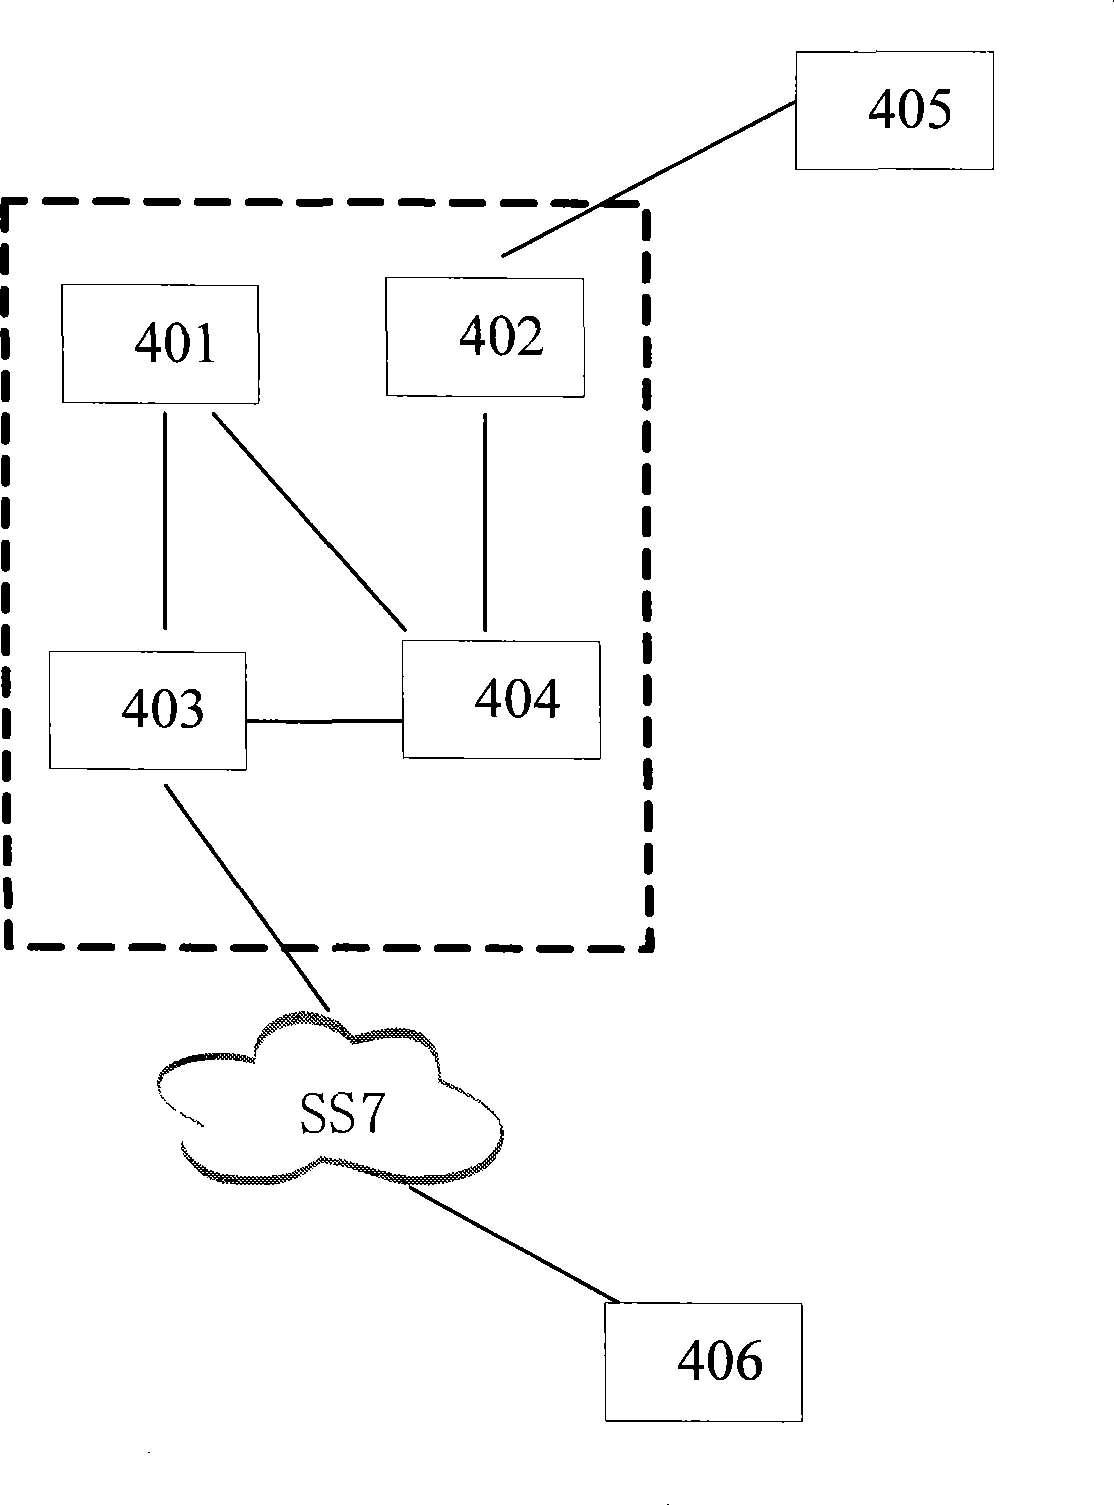 Method for non-standardized dialing service monitoring between networks